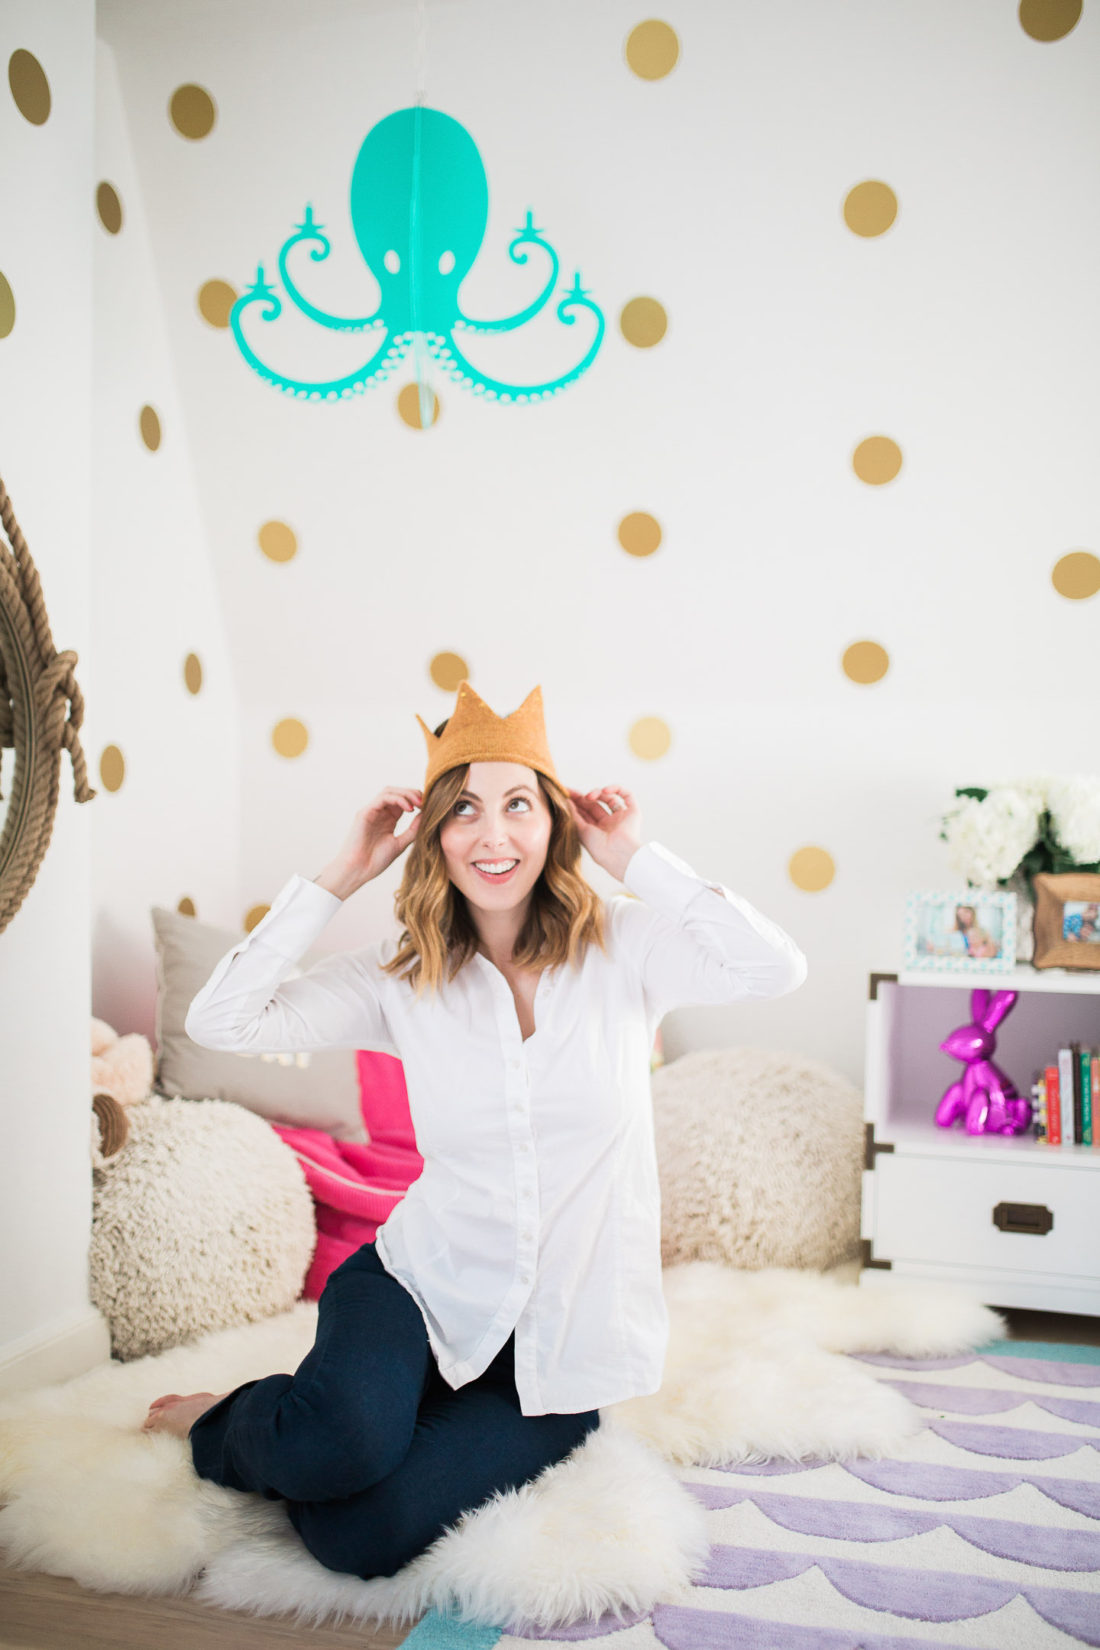 Eva Amurri Martino pictured in the room she designed for her daughter Marlowe in their connecticut home